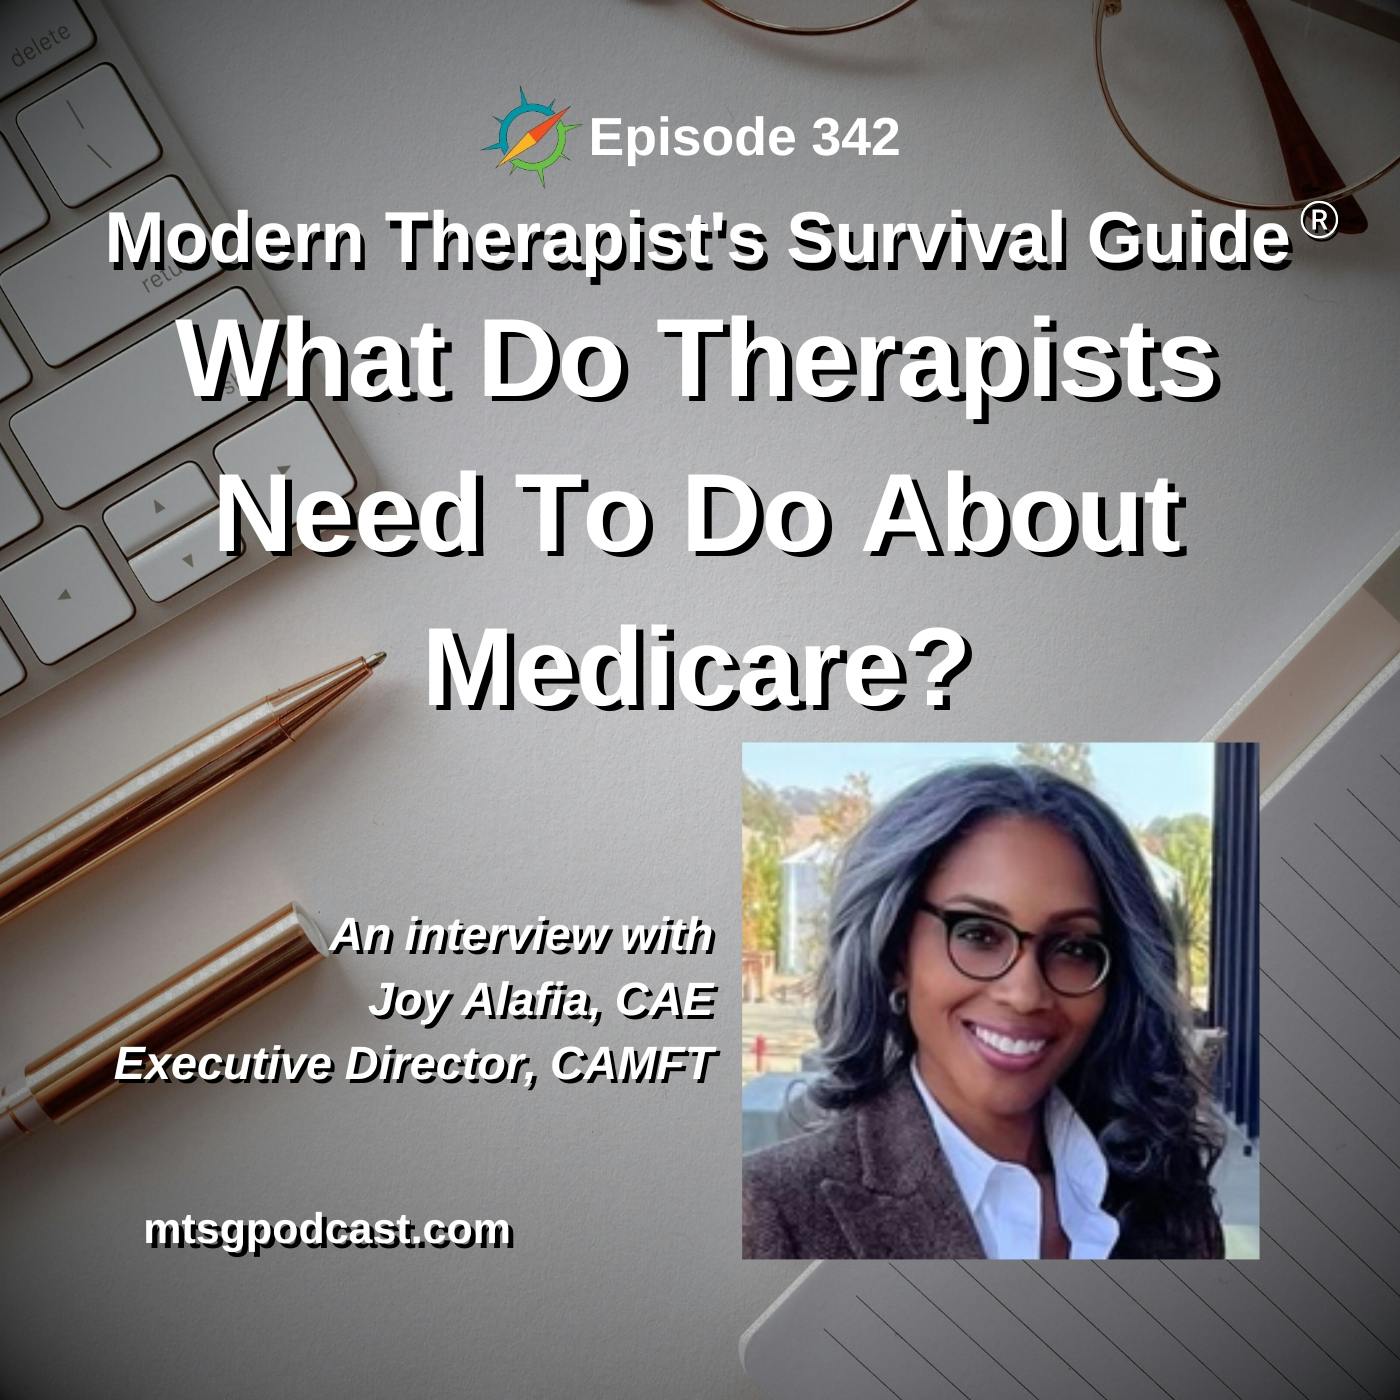 What Do Therapists Need To Do About Medicare? Opting in or out for 2024: An interview with Joy Alafia, CAE